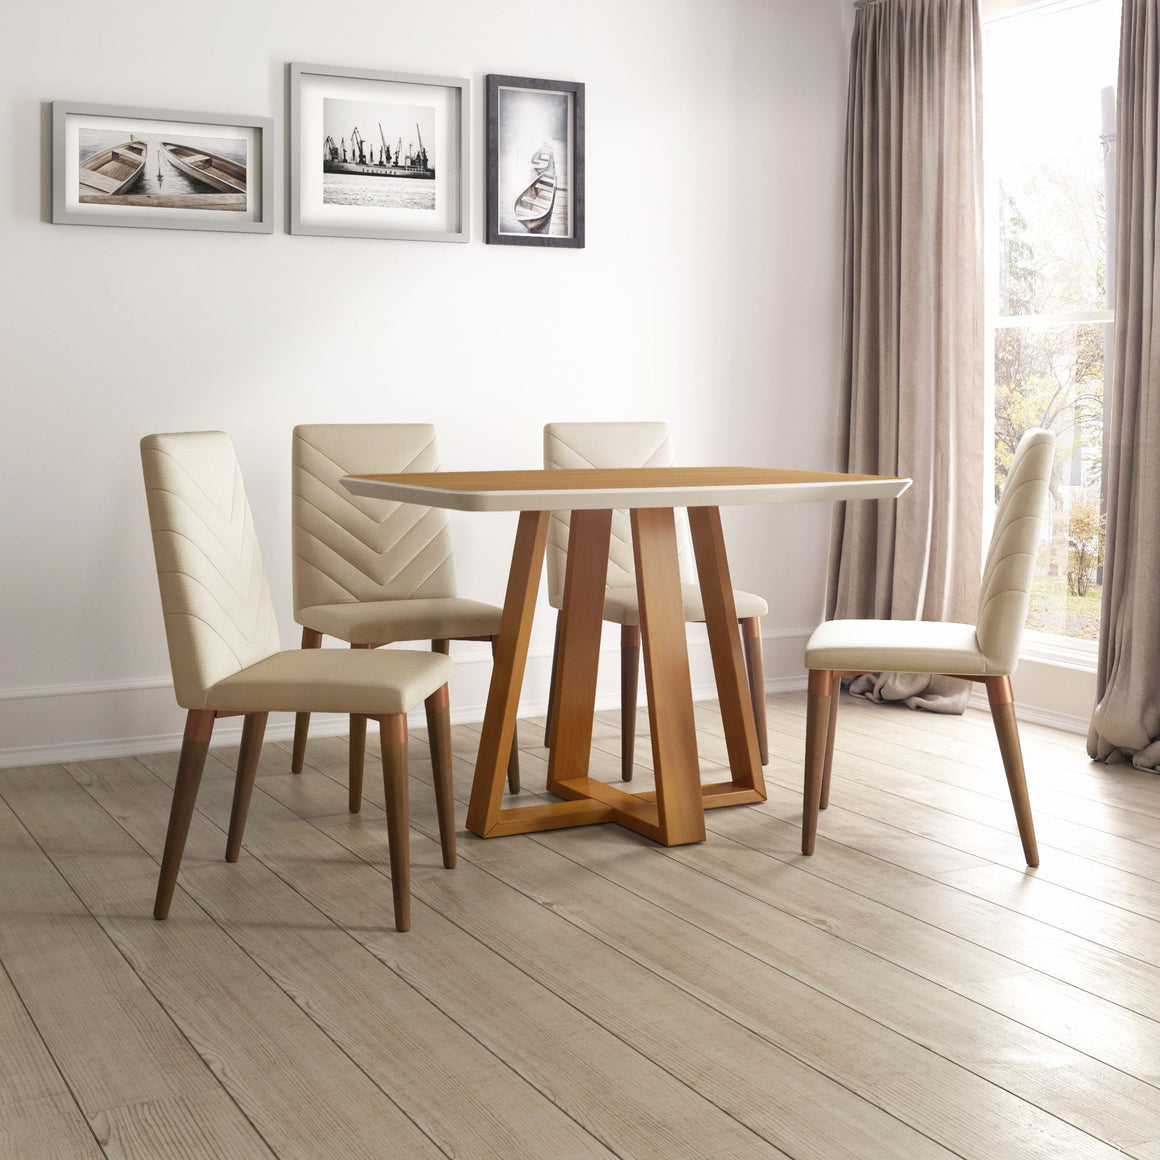 Duffy 62.99 Modern Rectangle Dining Table and Utopia Chevron Dining Chair in Cinnamon Off White and Beige - Set of 7